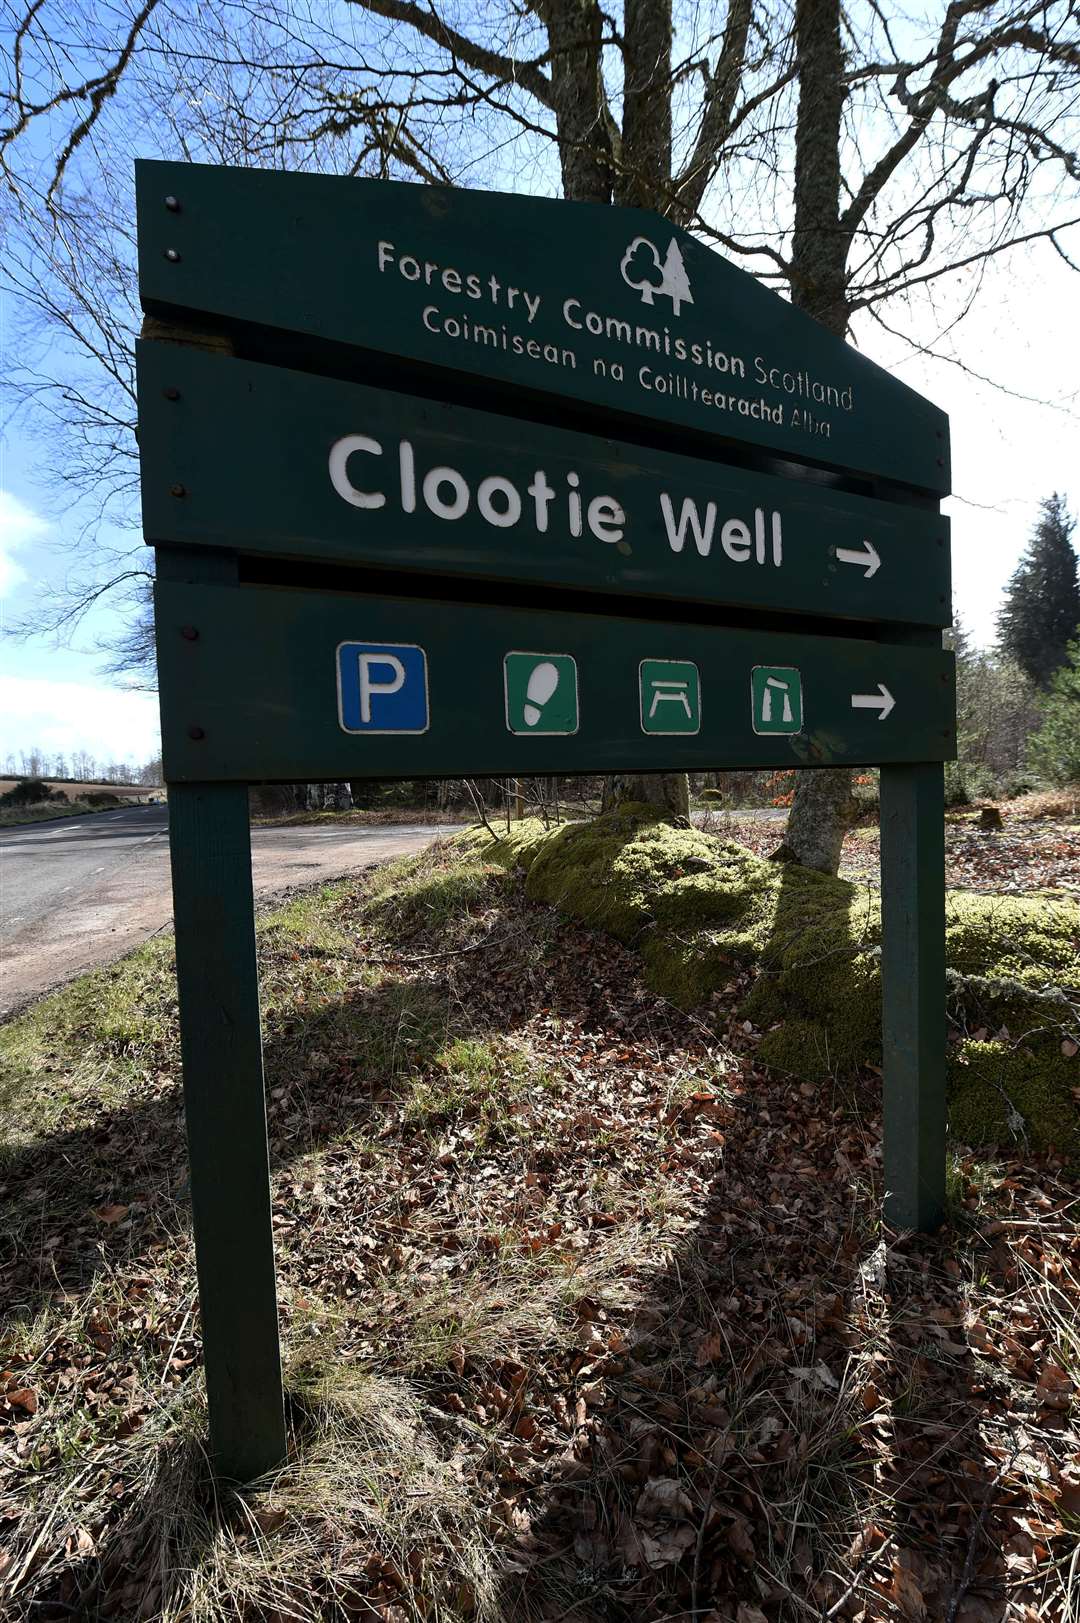 The Clootie Well has become a visitor attraction.